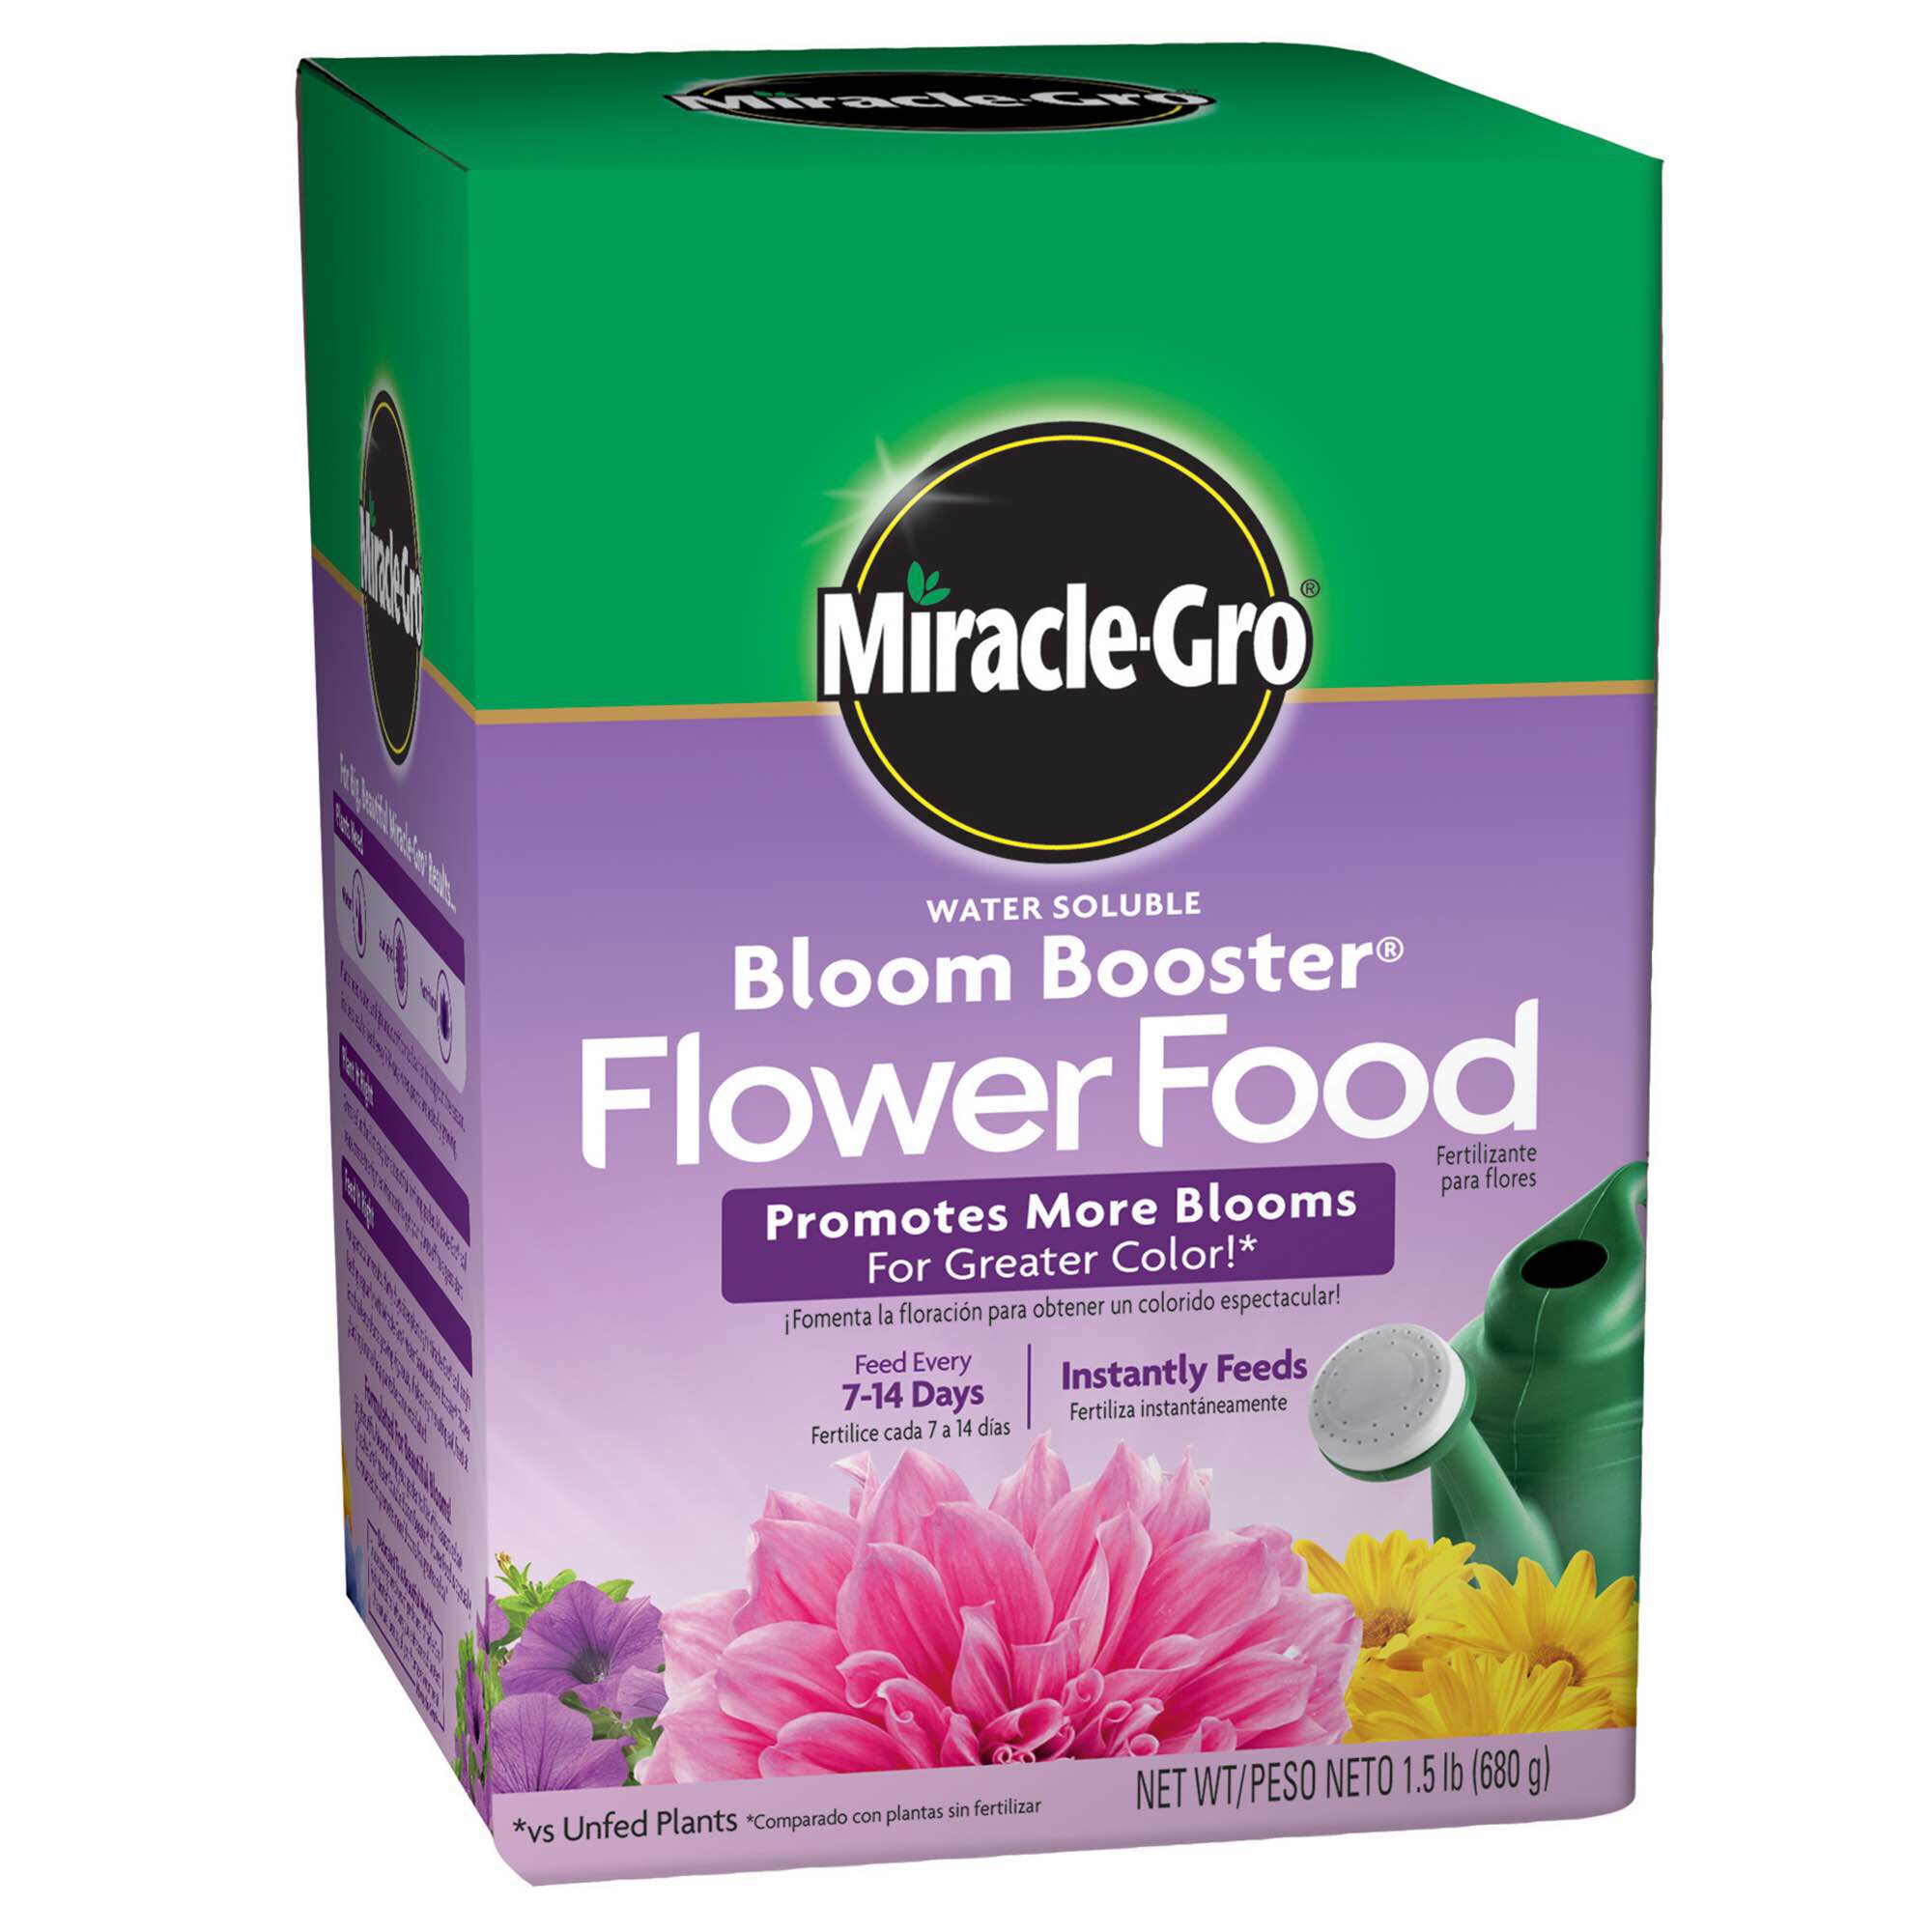 Image of Miracle-Gro Bloom Booster Flower Food for petunias